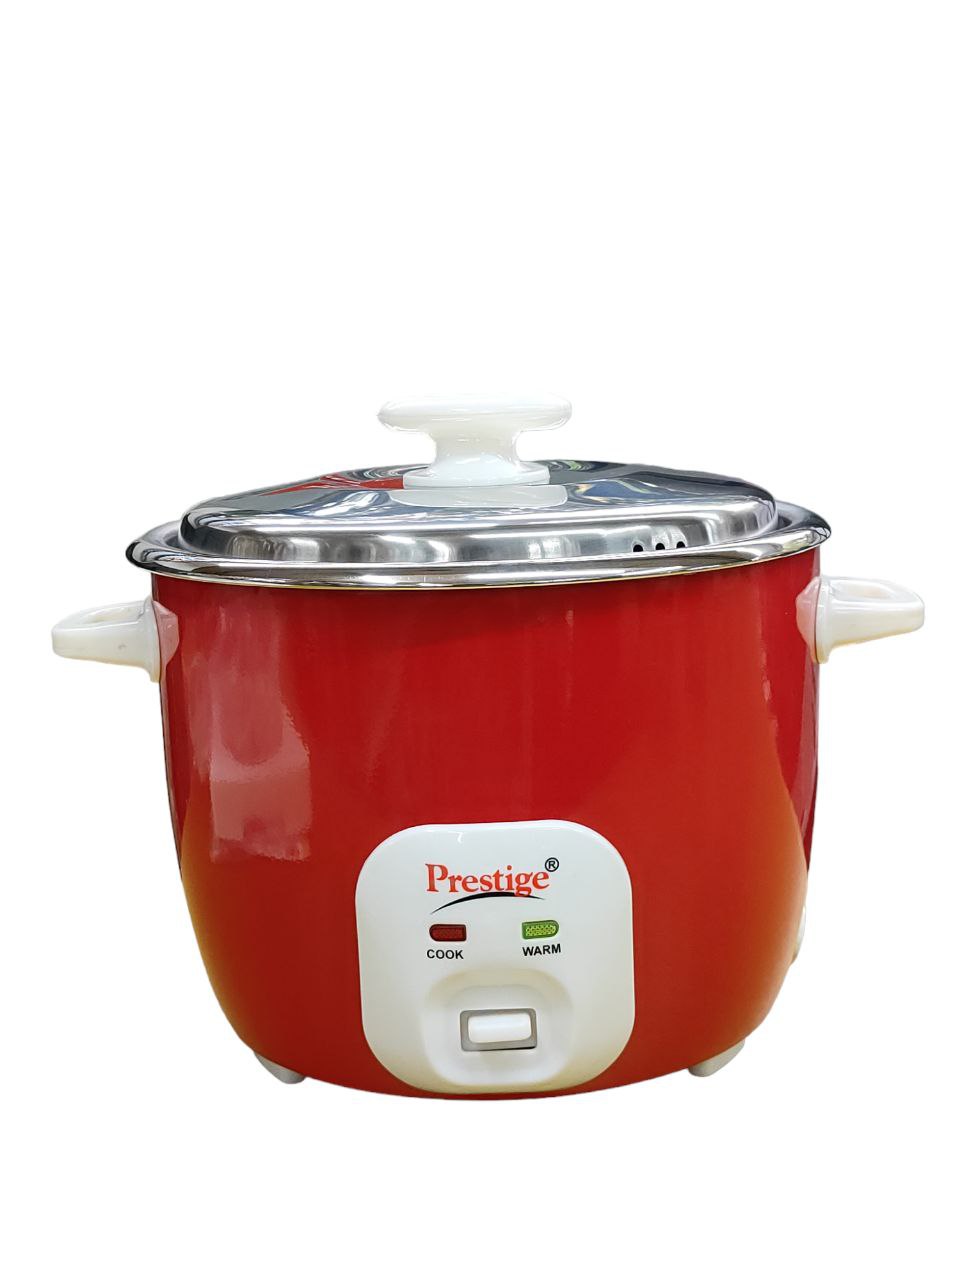 Prestige Delight Cute 1.8-SS Electric Rice Cooker | 1.8L Stainless Steel Pot, Keep-Warm Feature, Cool-Touch Handles | Versatile & Efficient Kitchen Essential